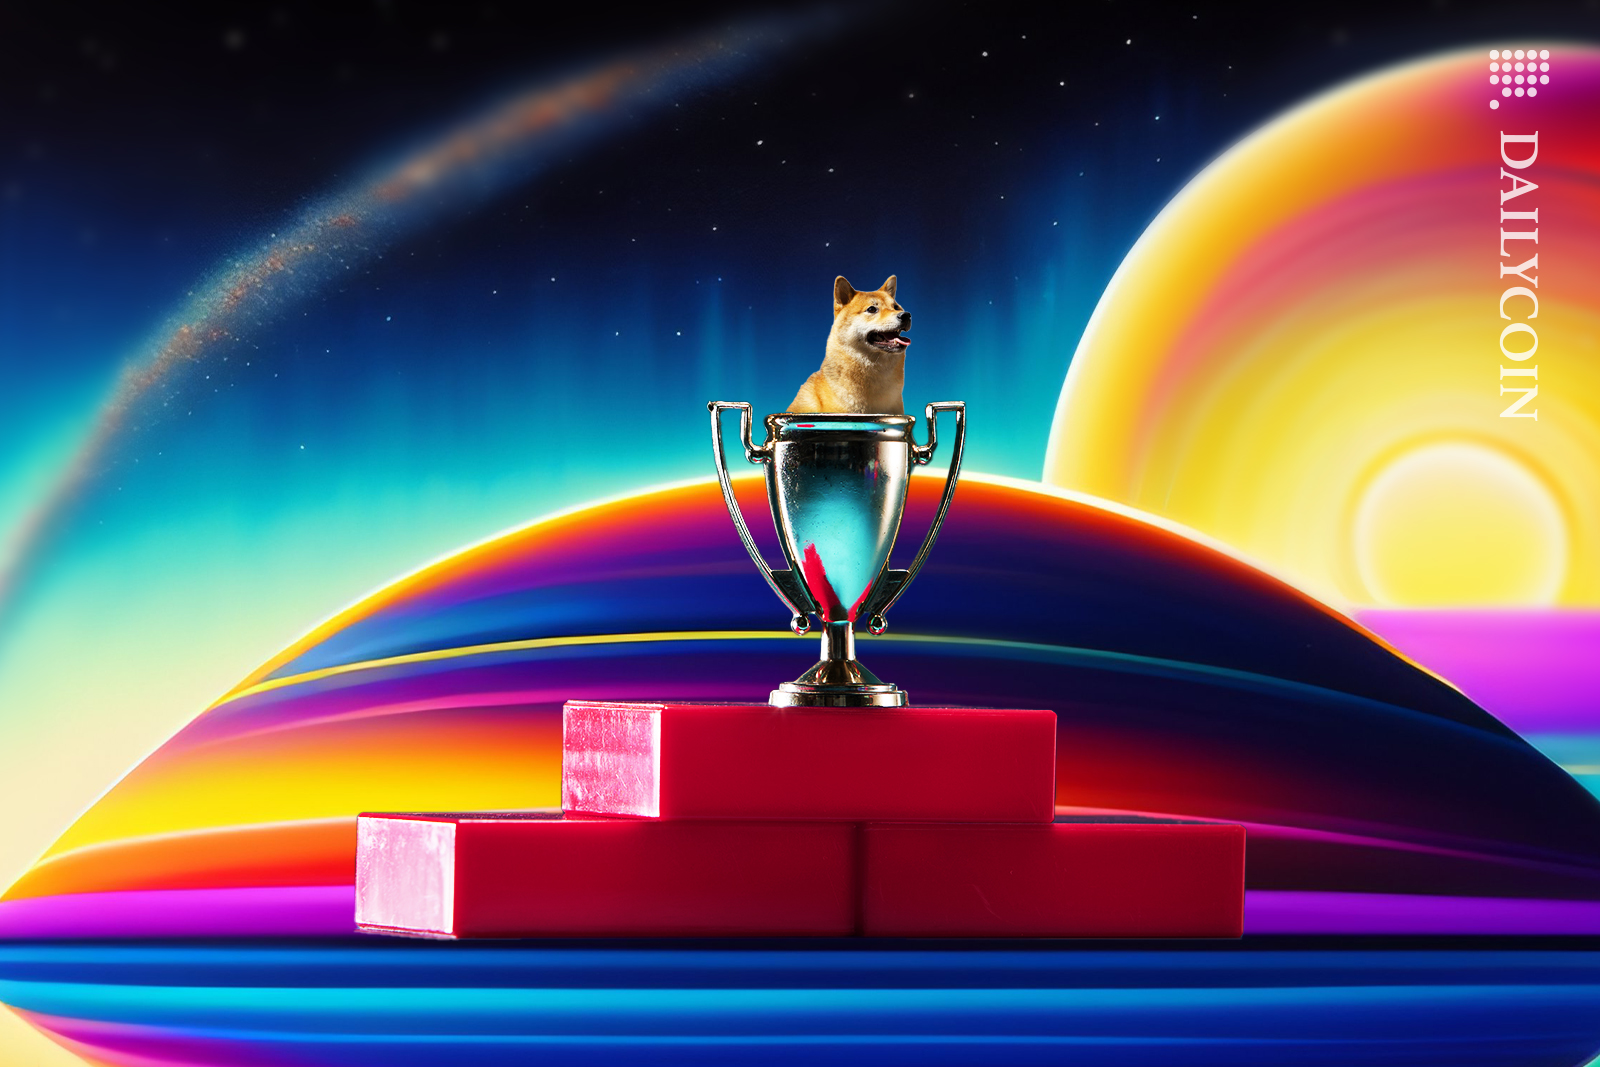 Shiba inu on top of a winners pannel in a trophie.